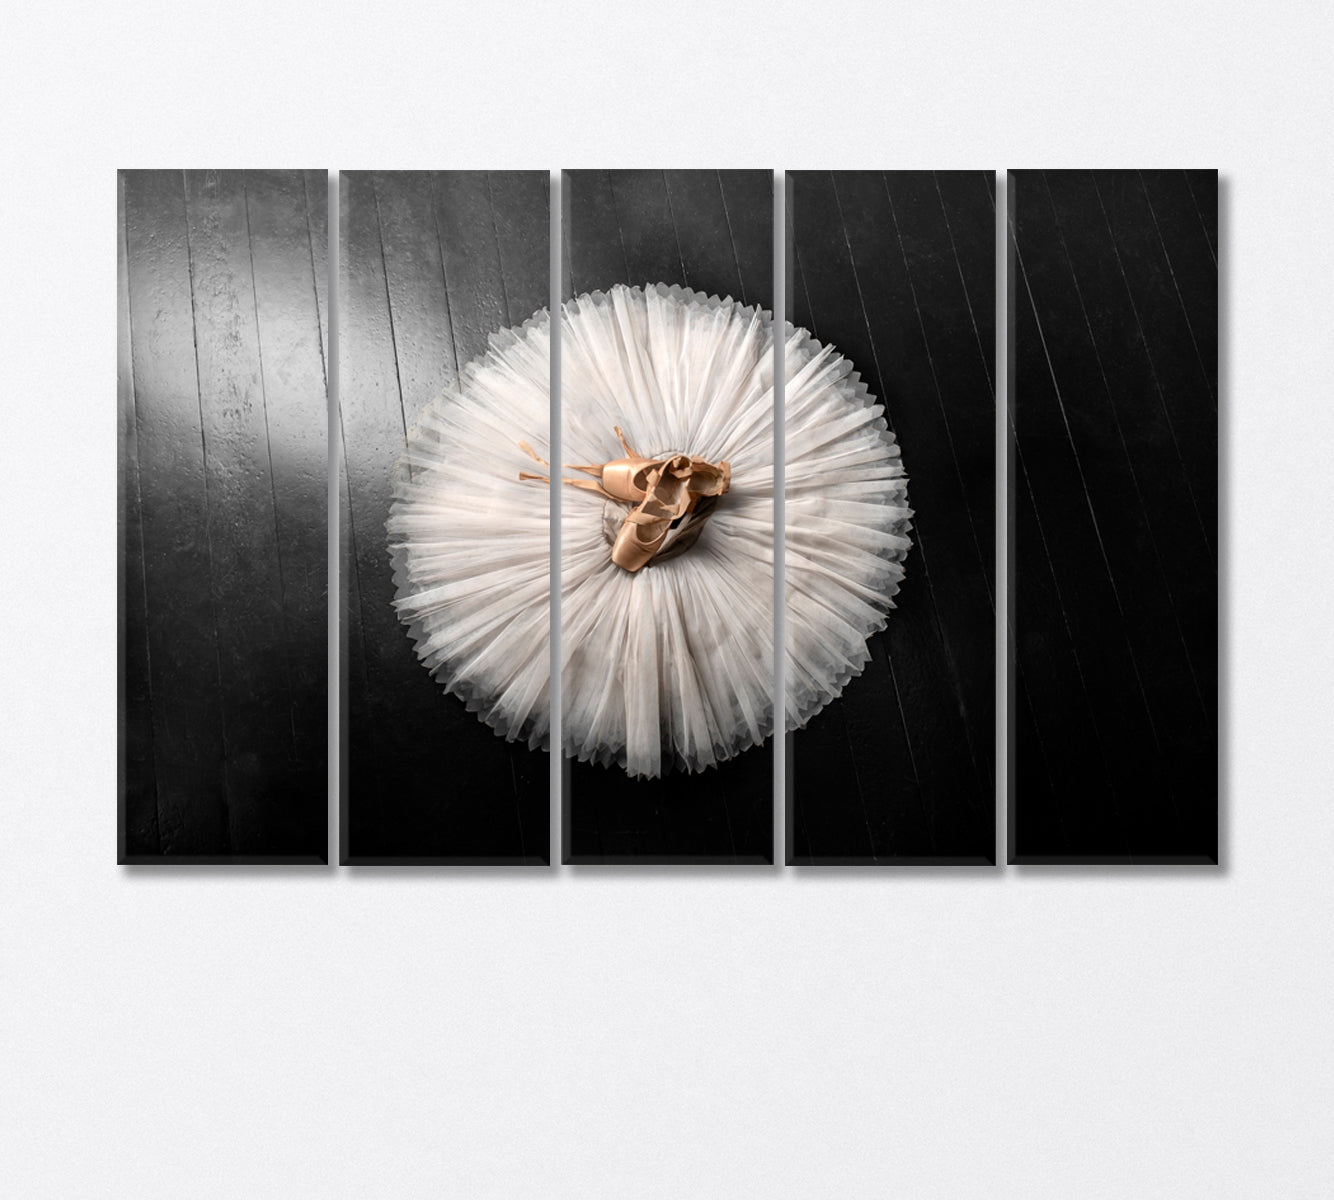 Professional Ballerina Outfit Pointe Shoes and Tutu Canvas Print-Canvas Print-CetArt-5 Panels-36x24 inches-CetArt